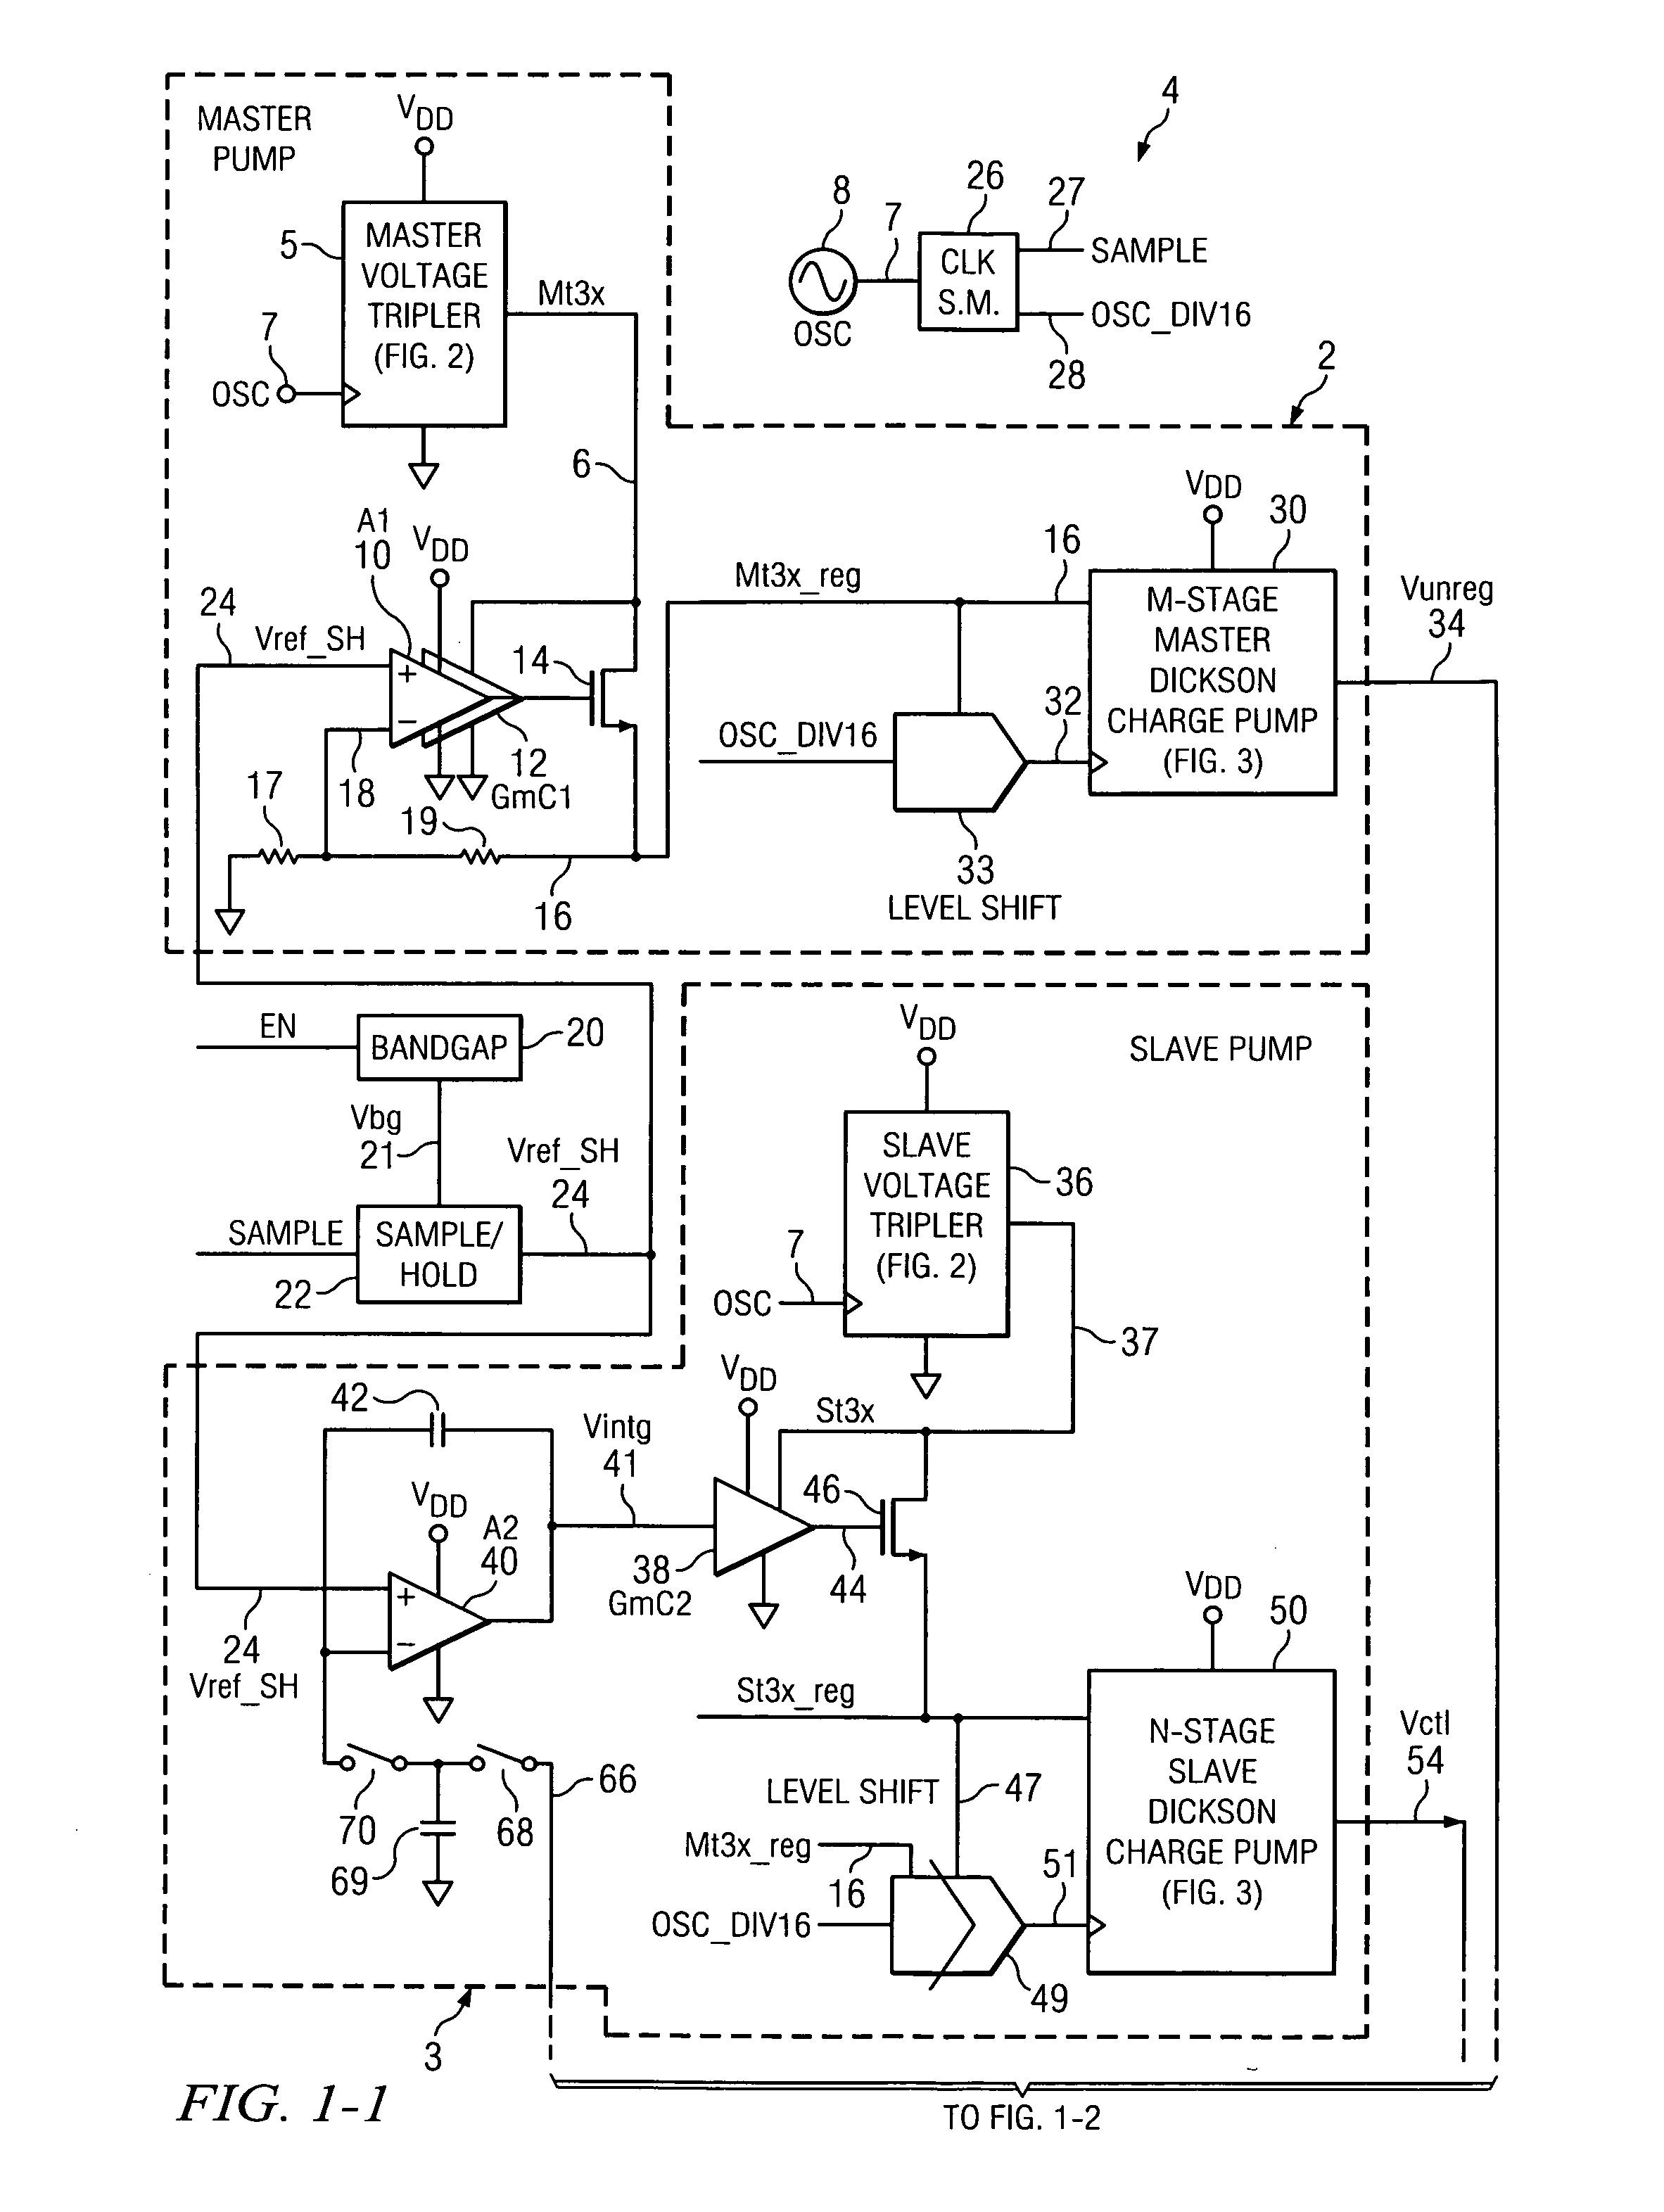 Master-slave low-noise charge pump circuit and method